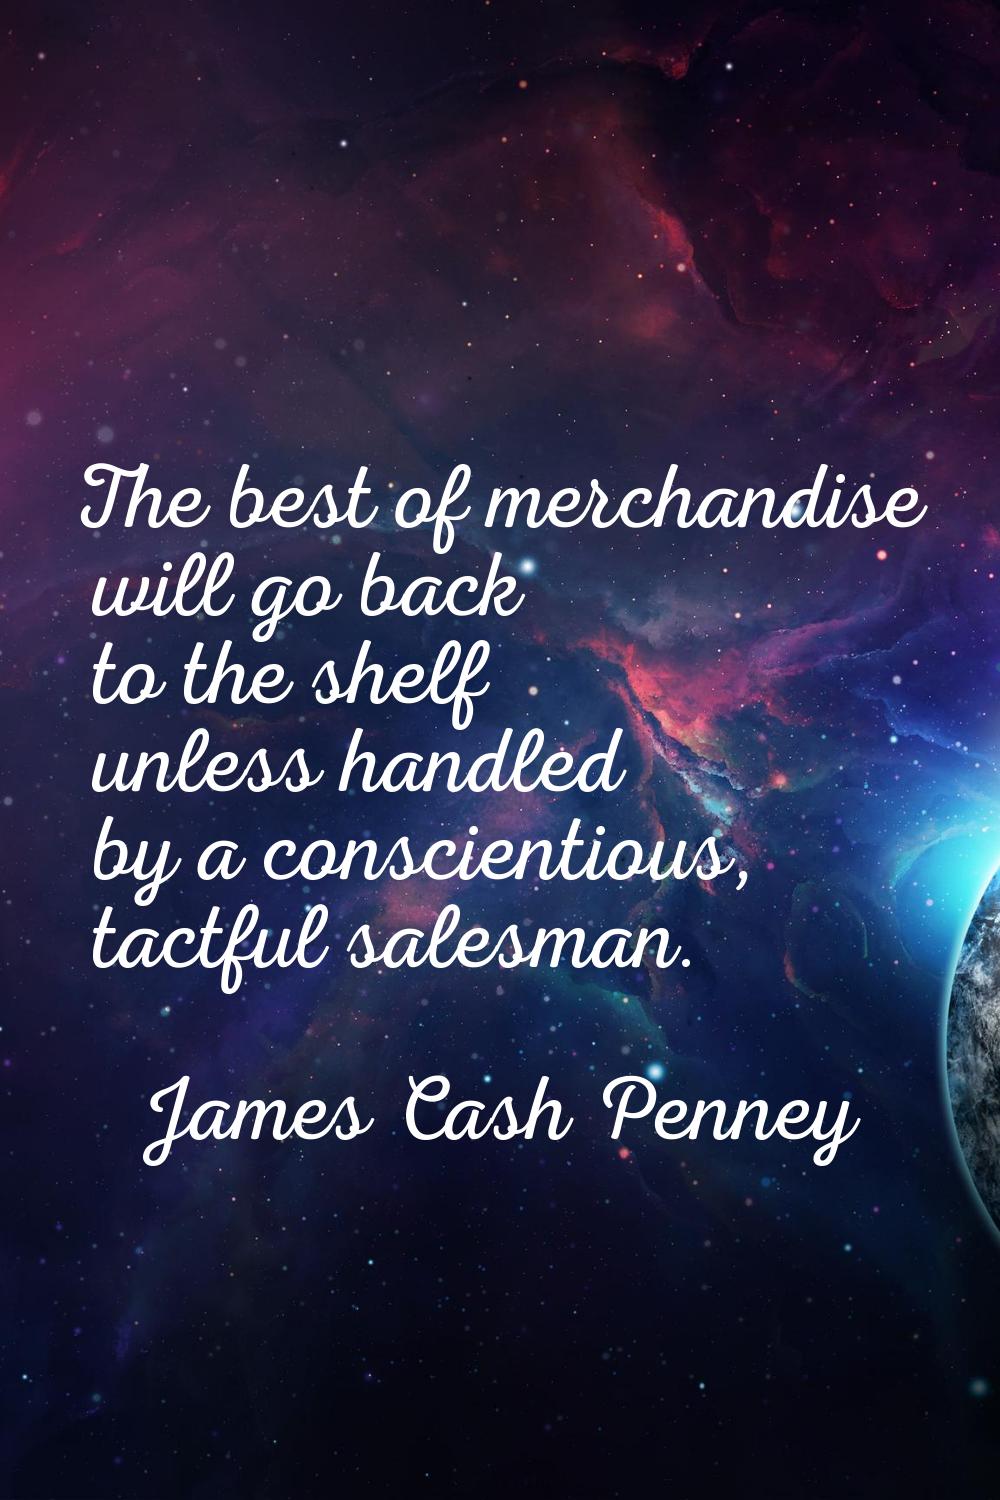 The best of merchandise will go back to the shelf unless handled by a conscientious, tactful salesm